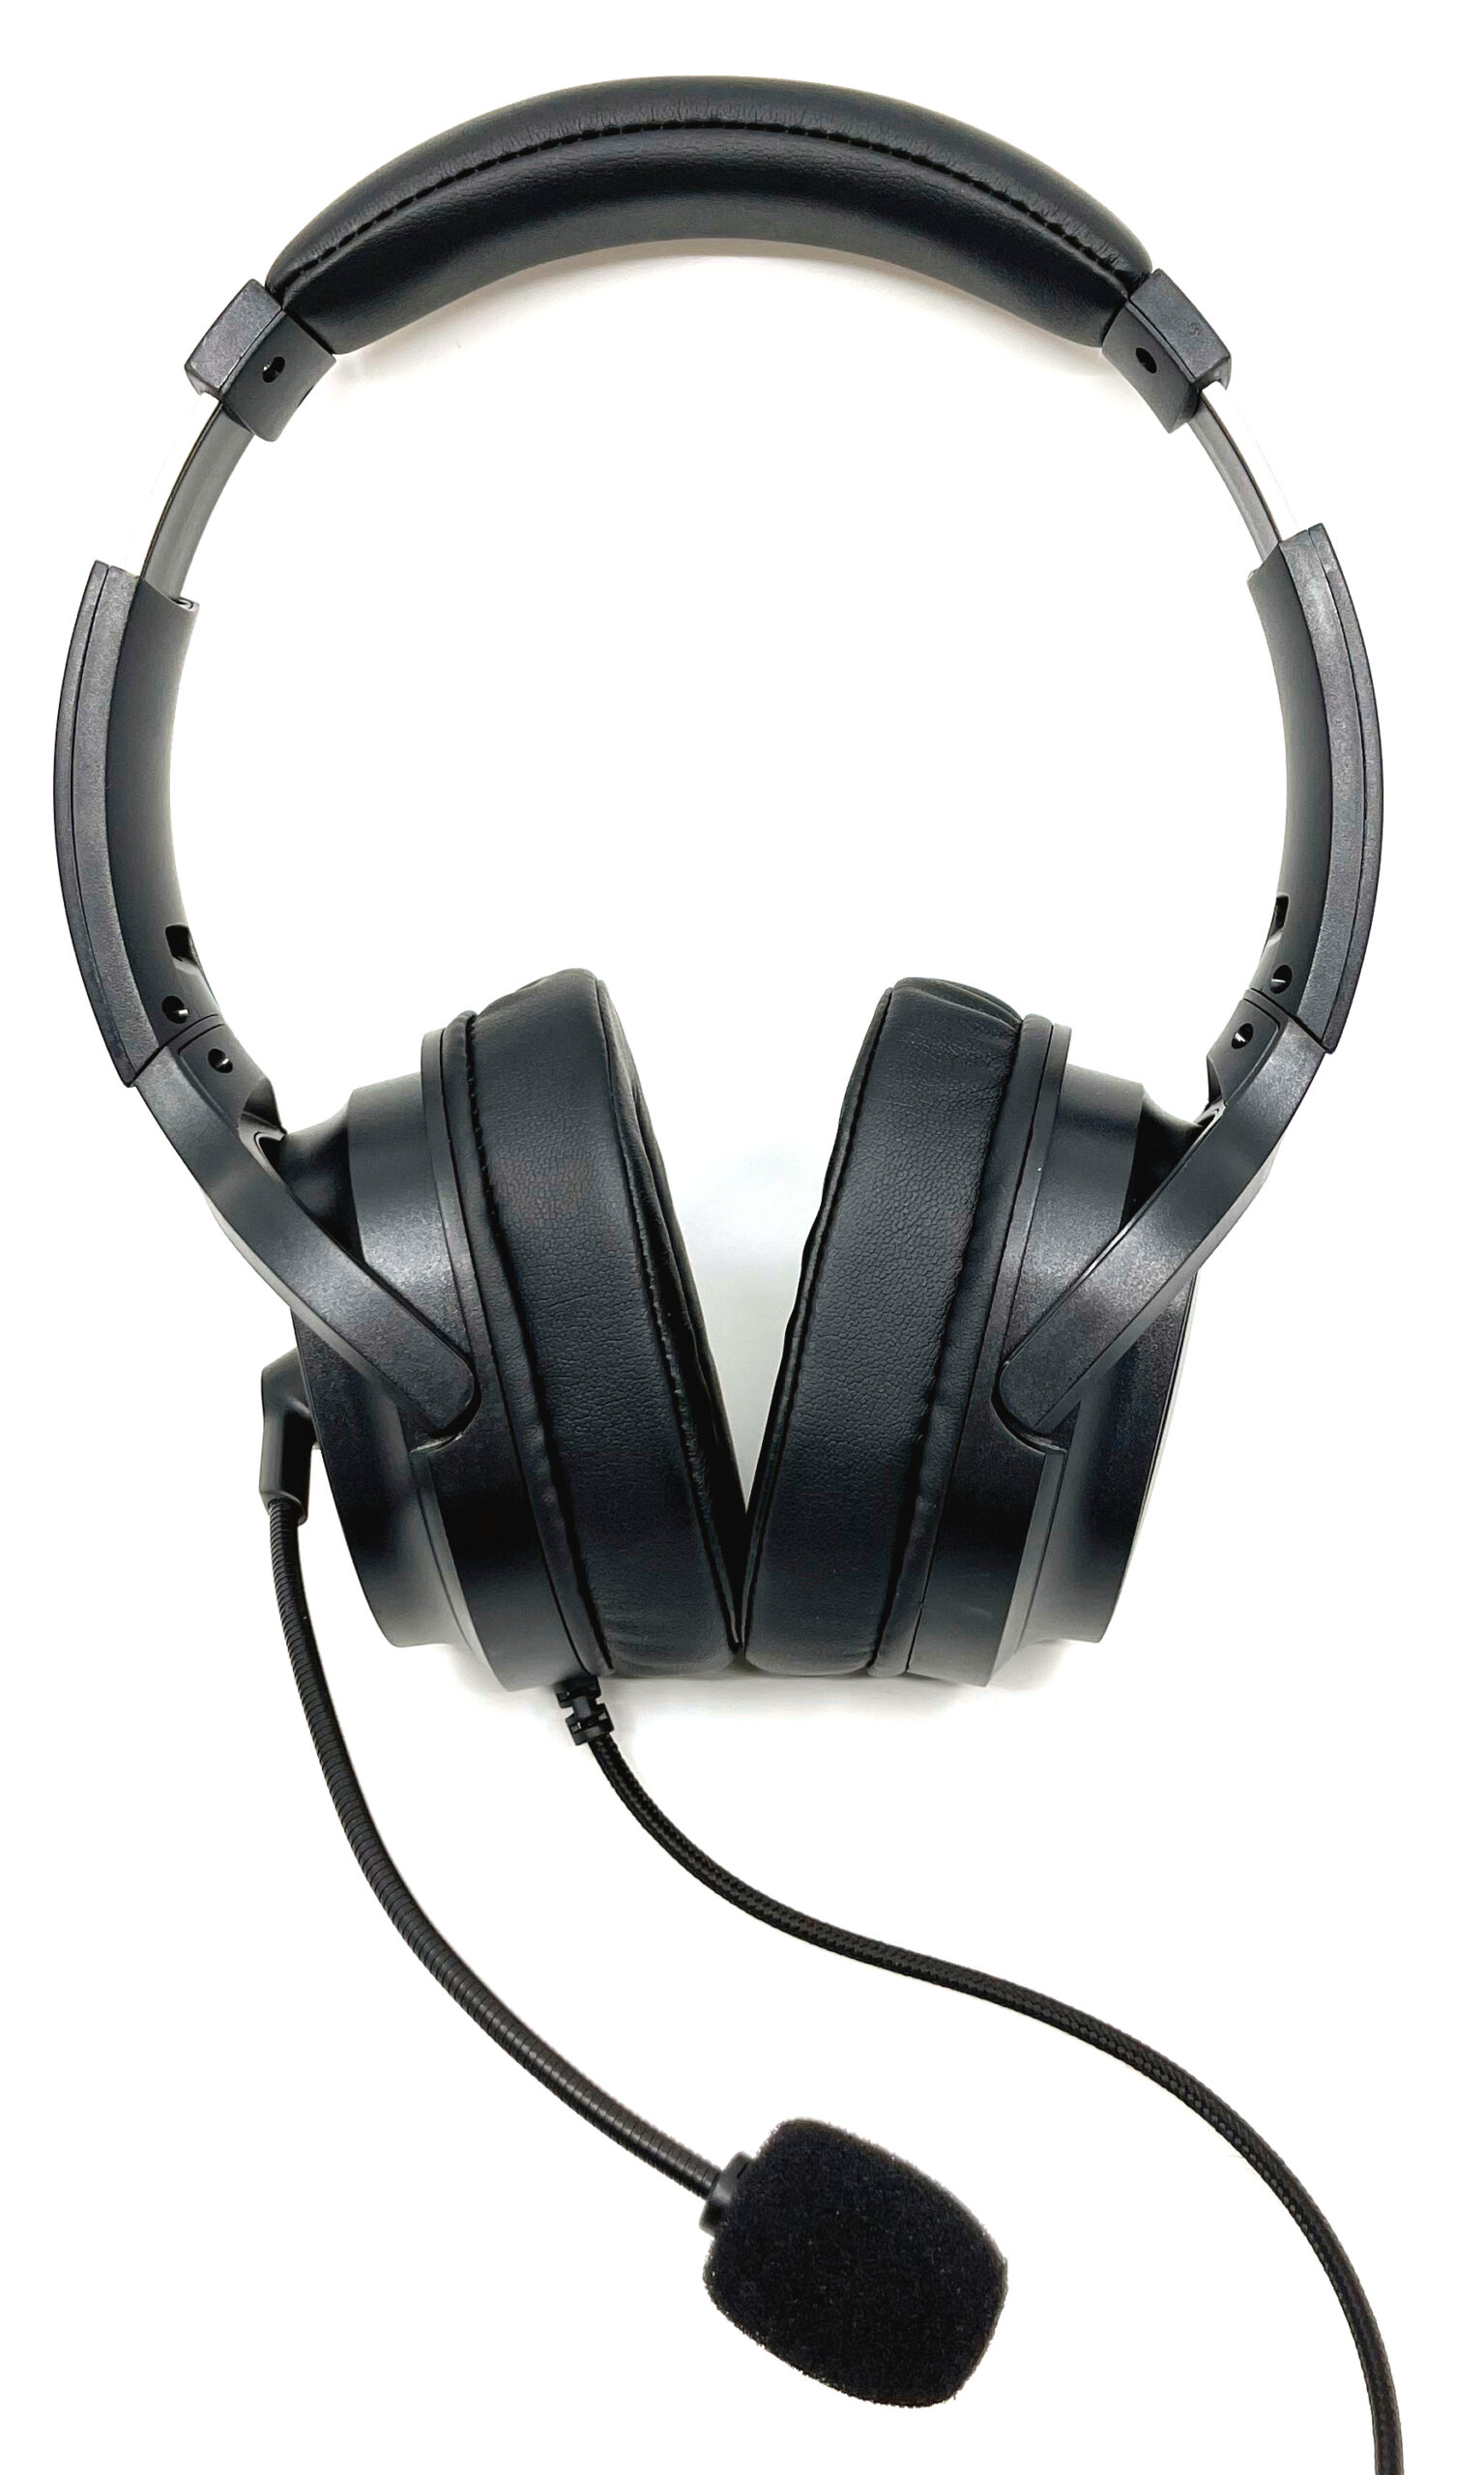 Professional Closed-Back Ultra-Lightweight Studio Monitor Headset Questions & Answers